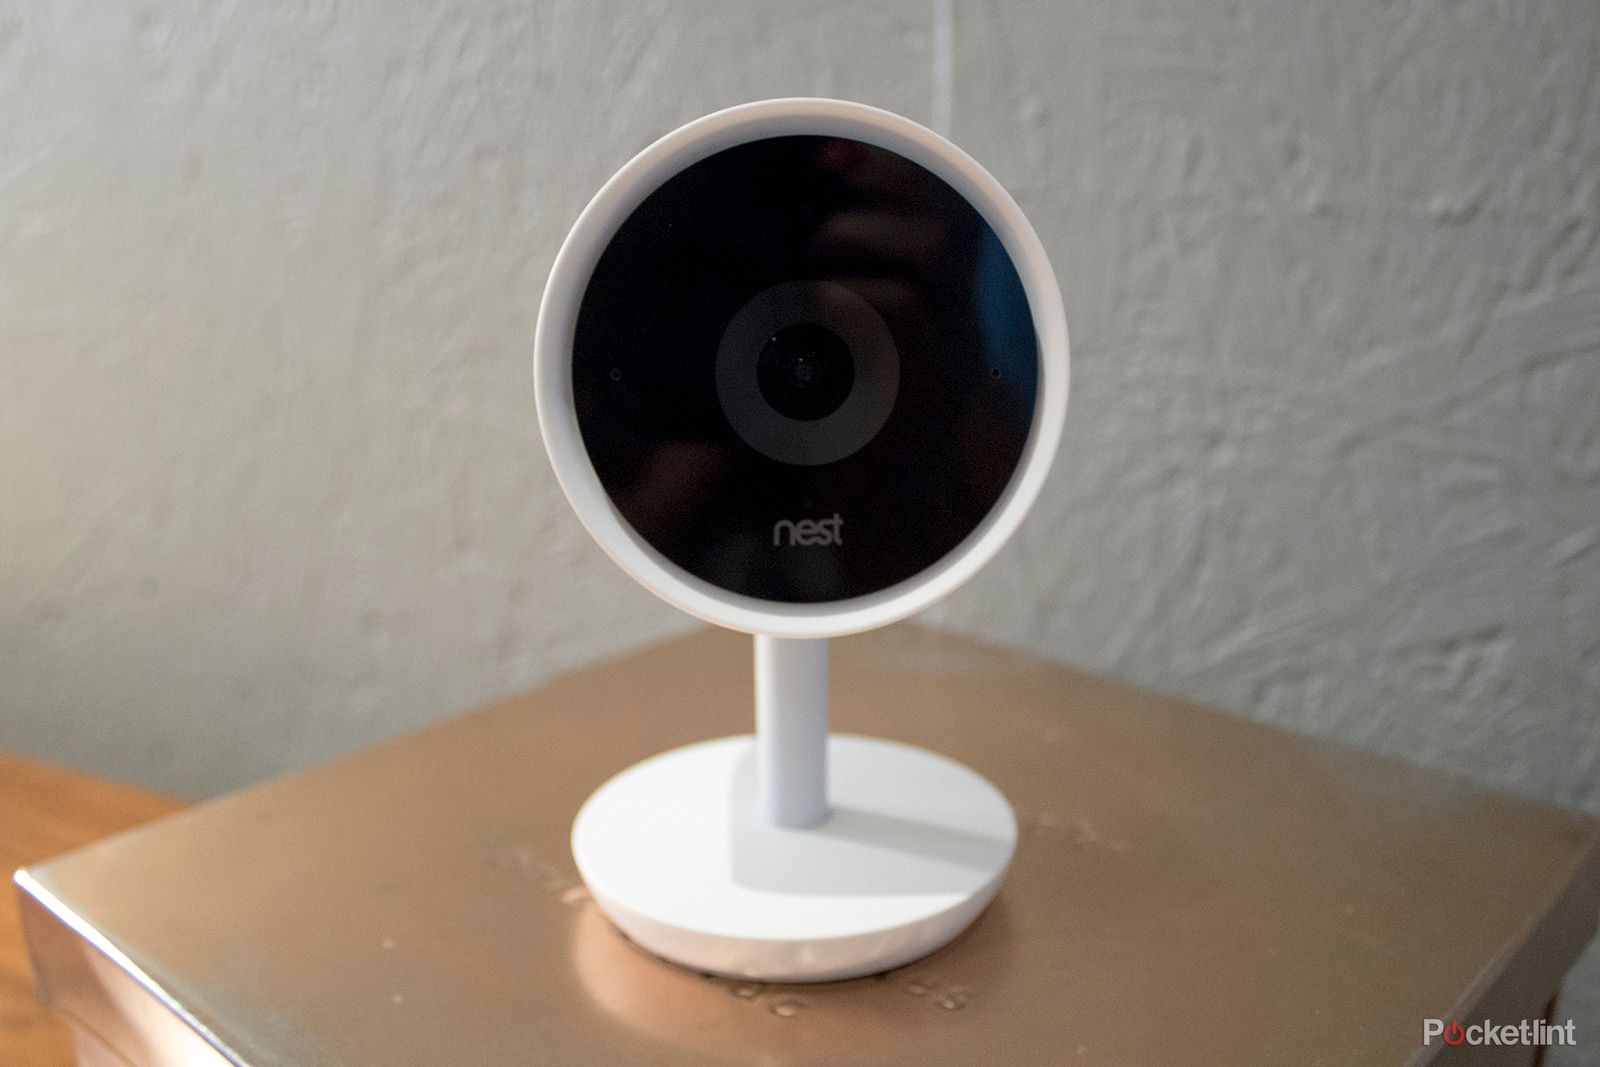 Nests indoor security camera now doubles as a Google Assistant speaker image 1